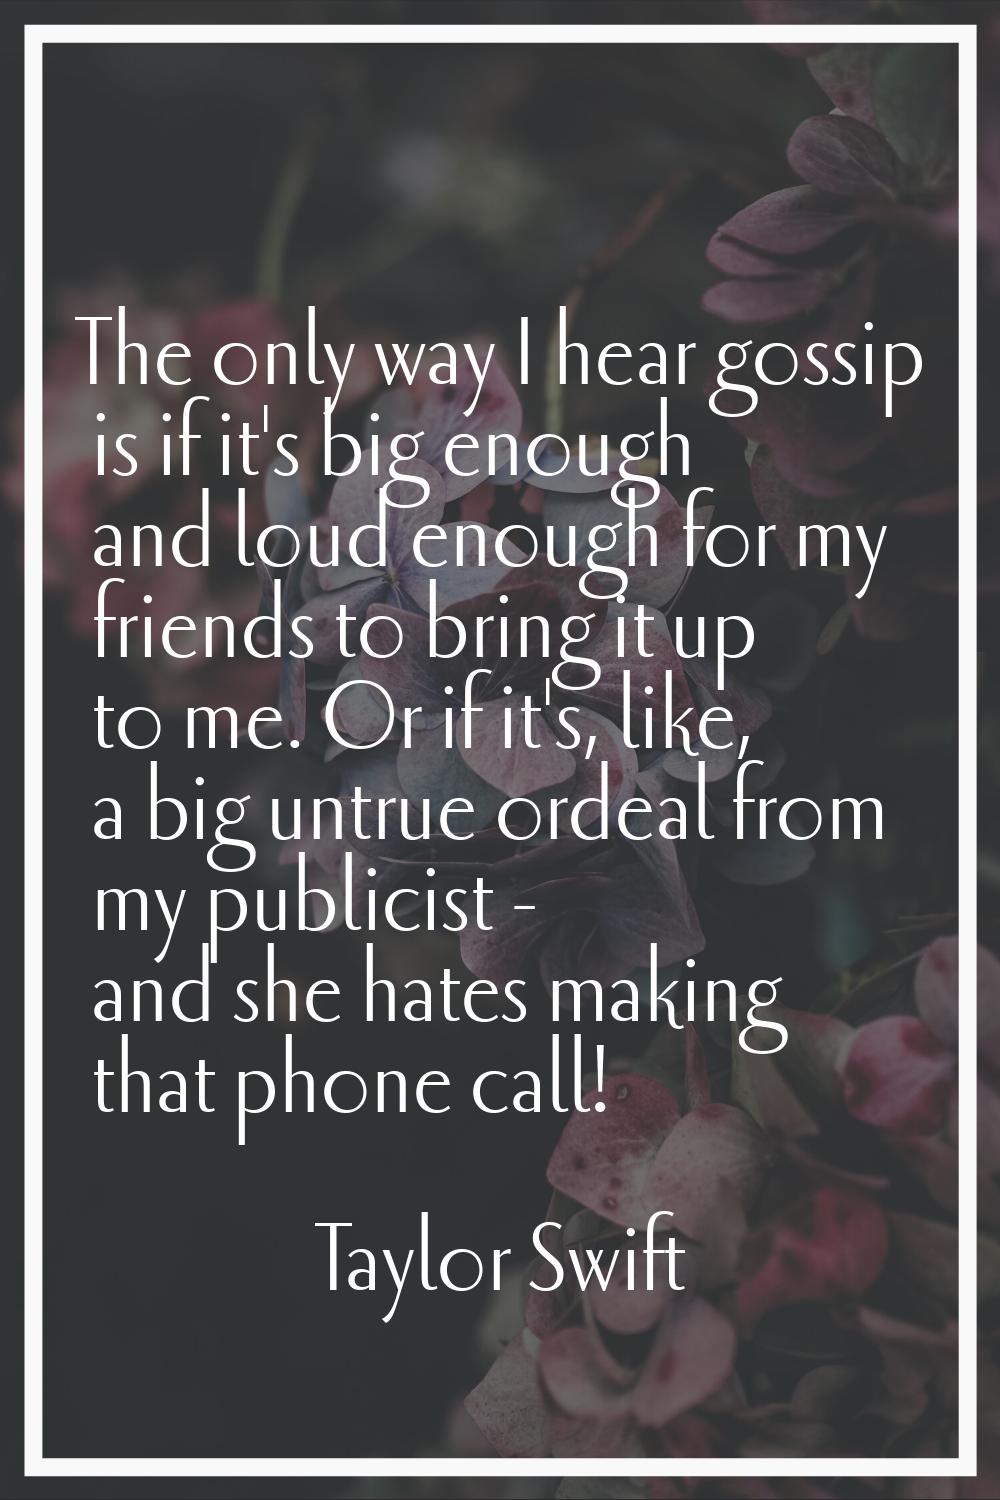 The only way I hear gossip is if it's big enough and loud enough for my friends to bring it up to m